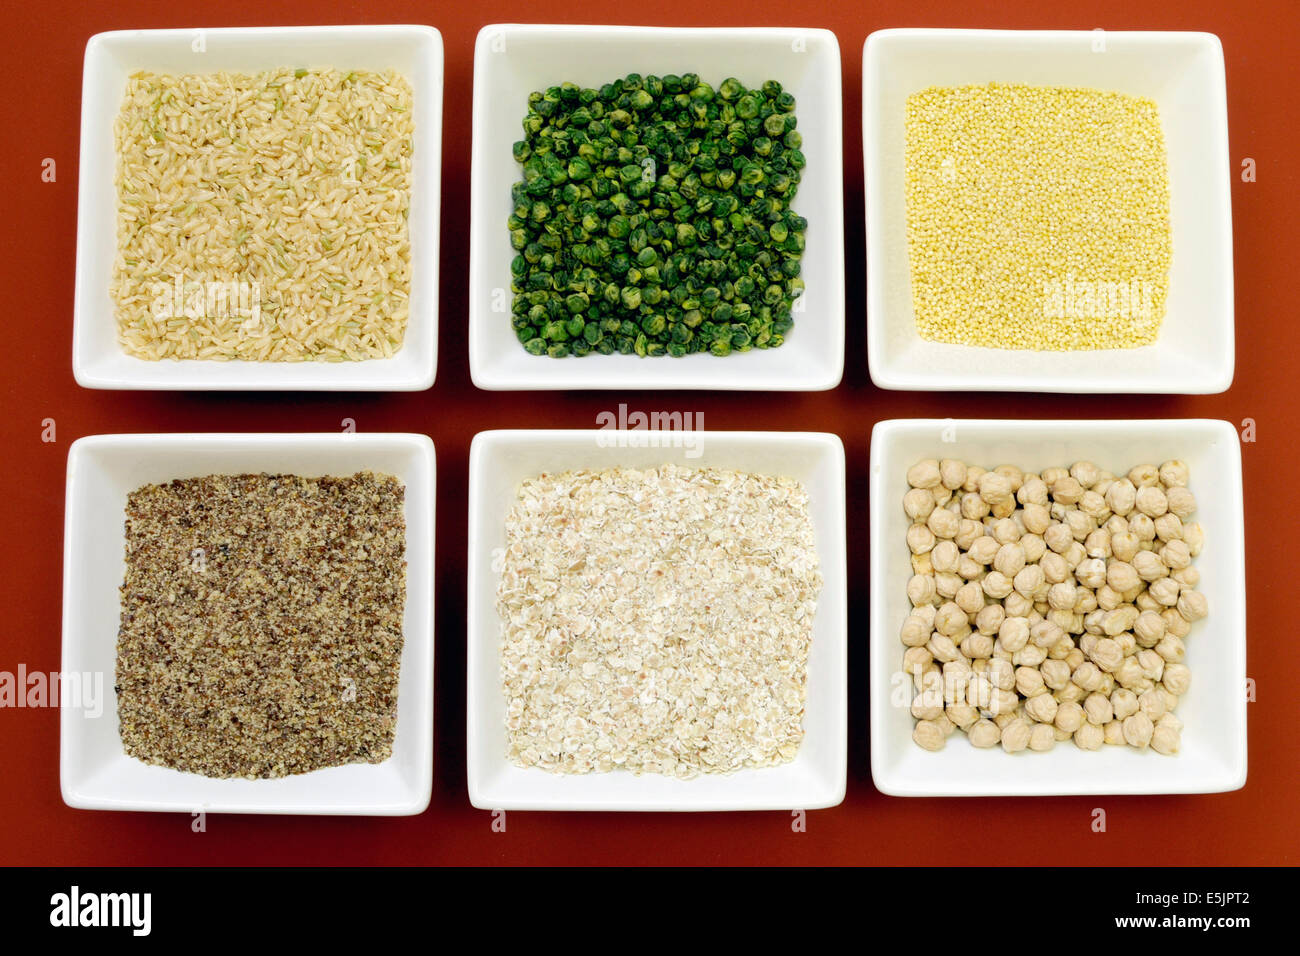 Gluten free grains food - brown rice, millet, LSA, buckwheat flakes and chickpeas and green peas legumes - for a healthy diet. Stock Photo